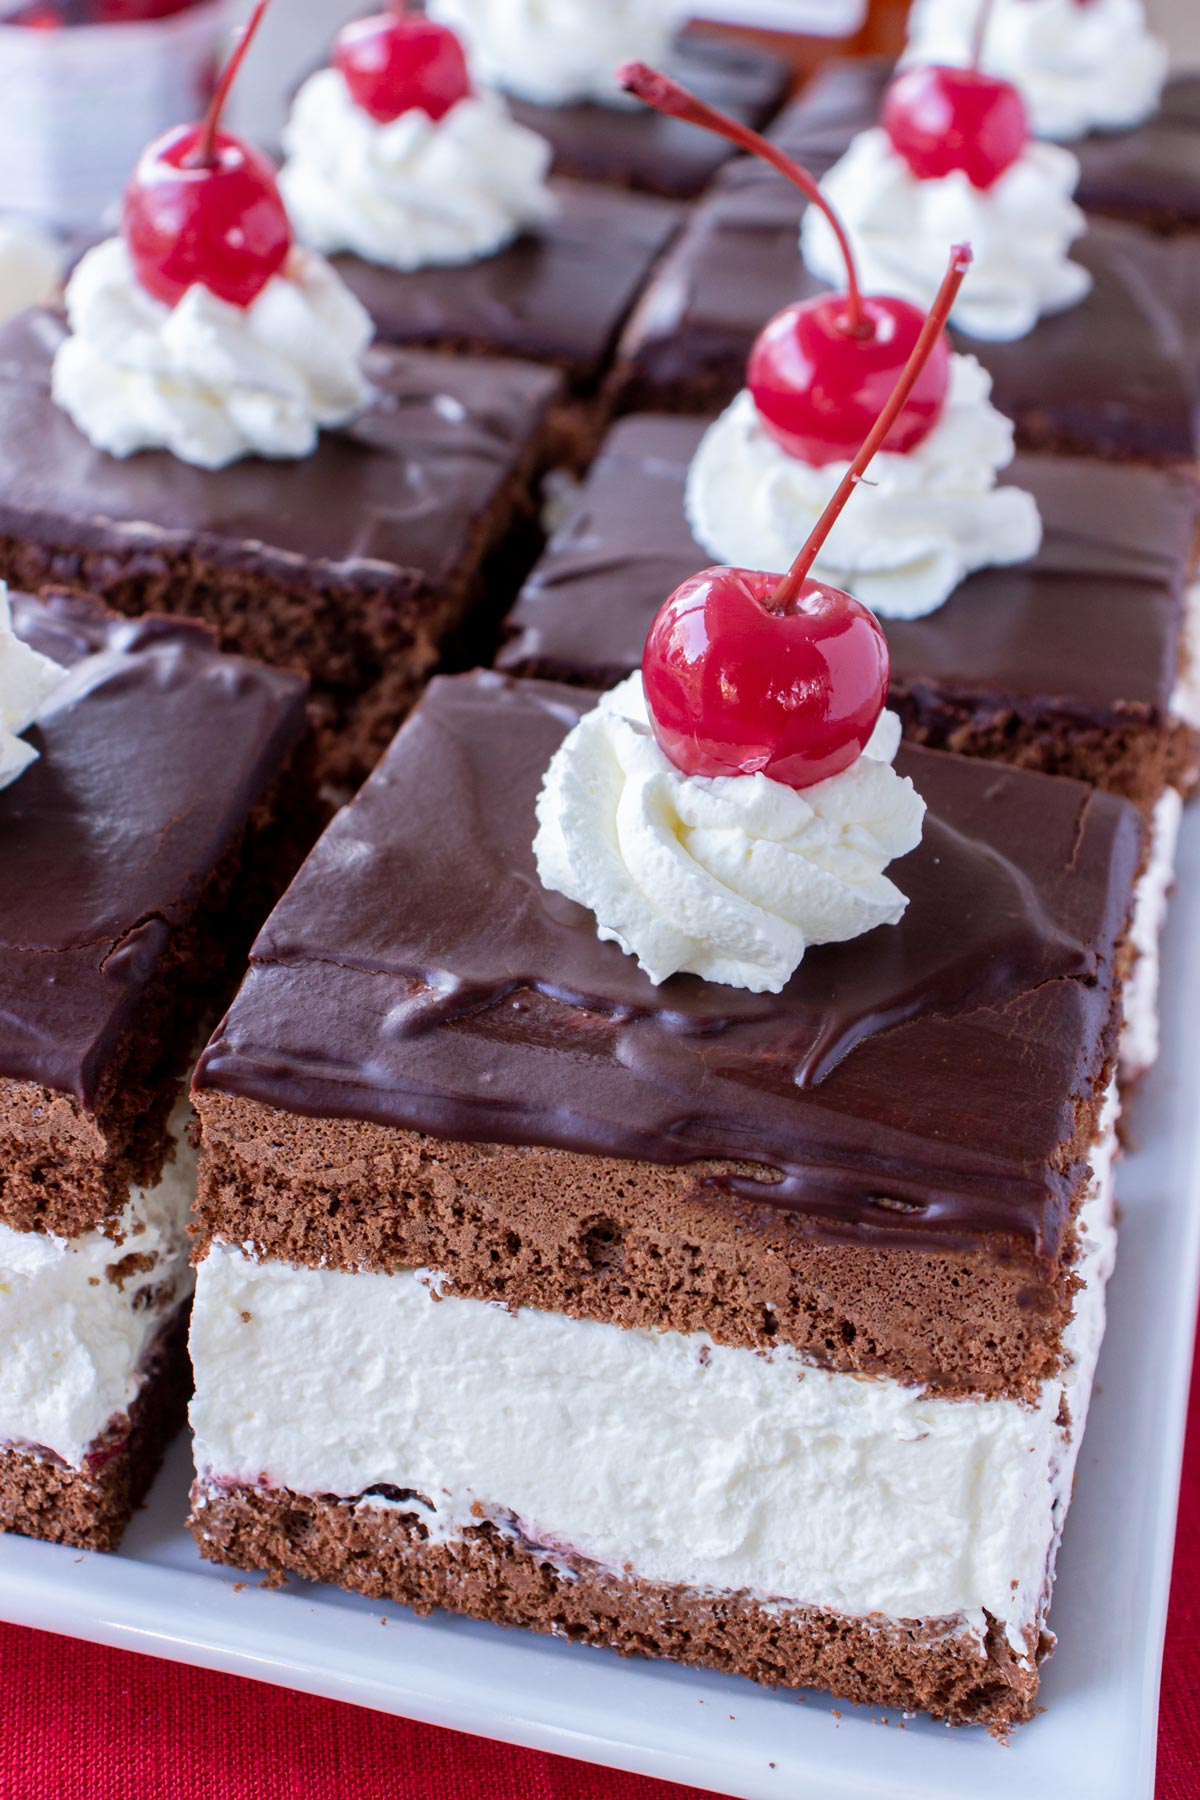 Two rows of square chocolate cake pieces filled with thick whipped cream on a white platter.